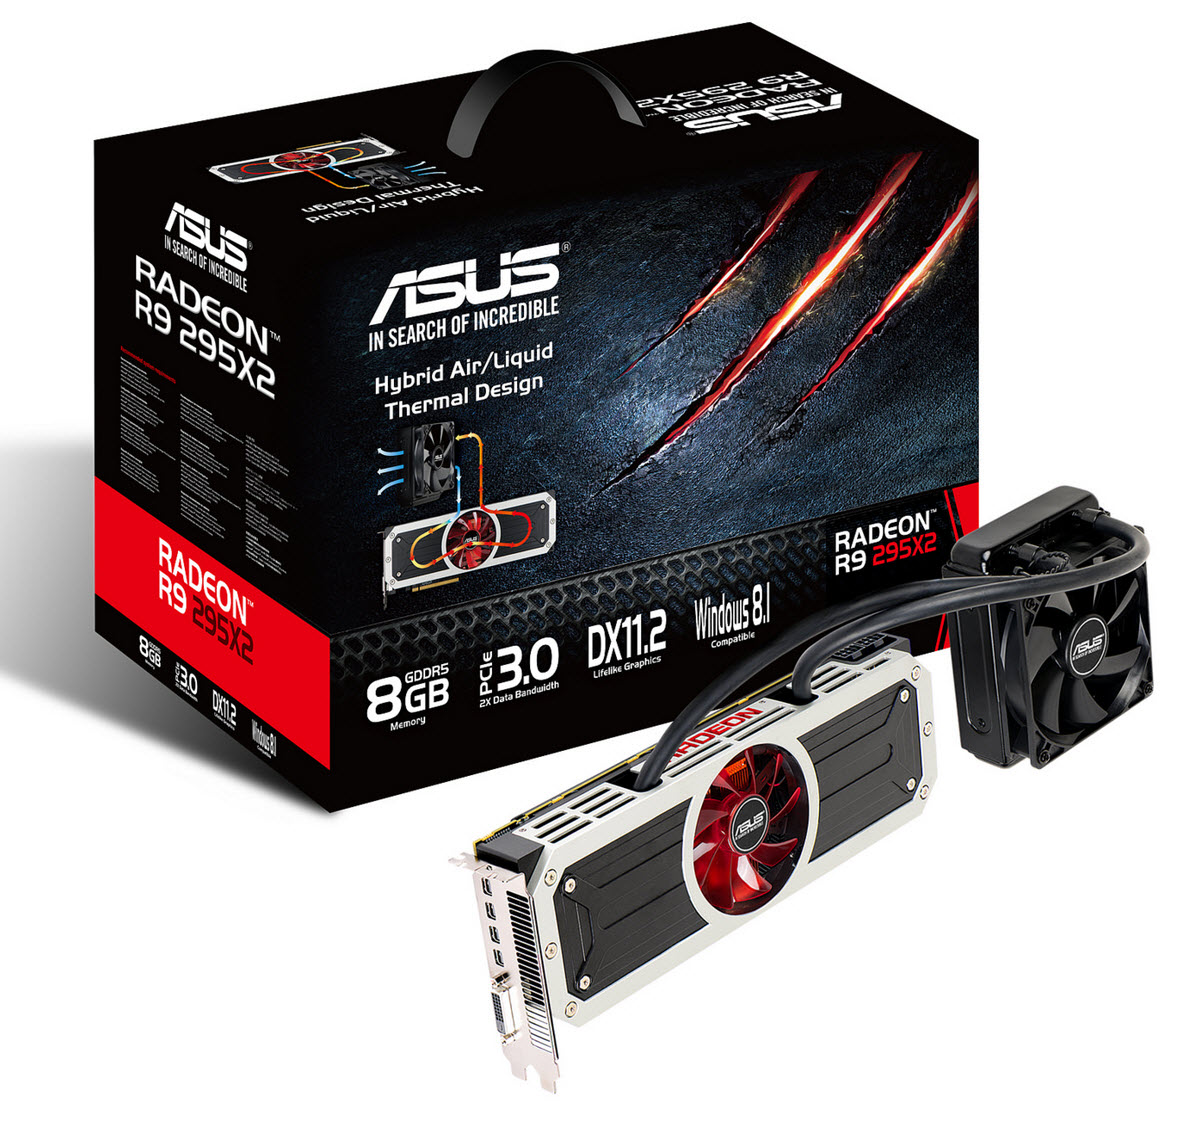 Media asset in full size related to 3dfxzone.it news item entitled as follows: Le foto della prossima video card Radeon R9 295X2 di ASUS | Image Name: news21000_ASUS-Radeon-R9-295X2_1.jpg